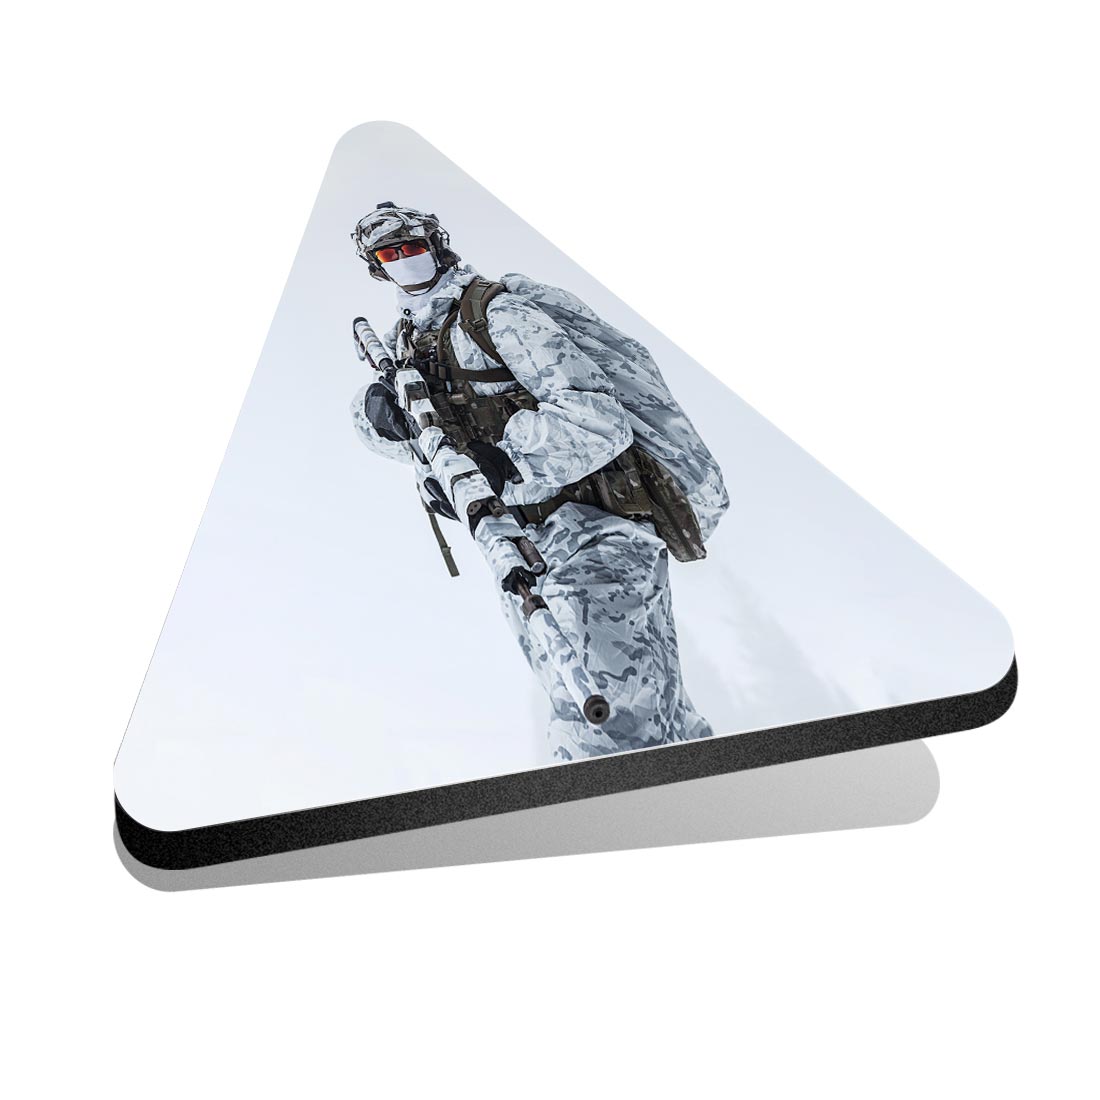 1x Triangle Fridge MDF Magnet Armed Forces Snow Warfare Army SAS #63006 - Picture 1 of 1